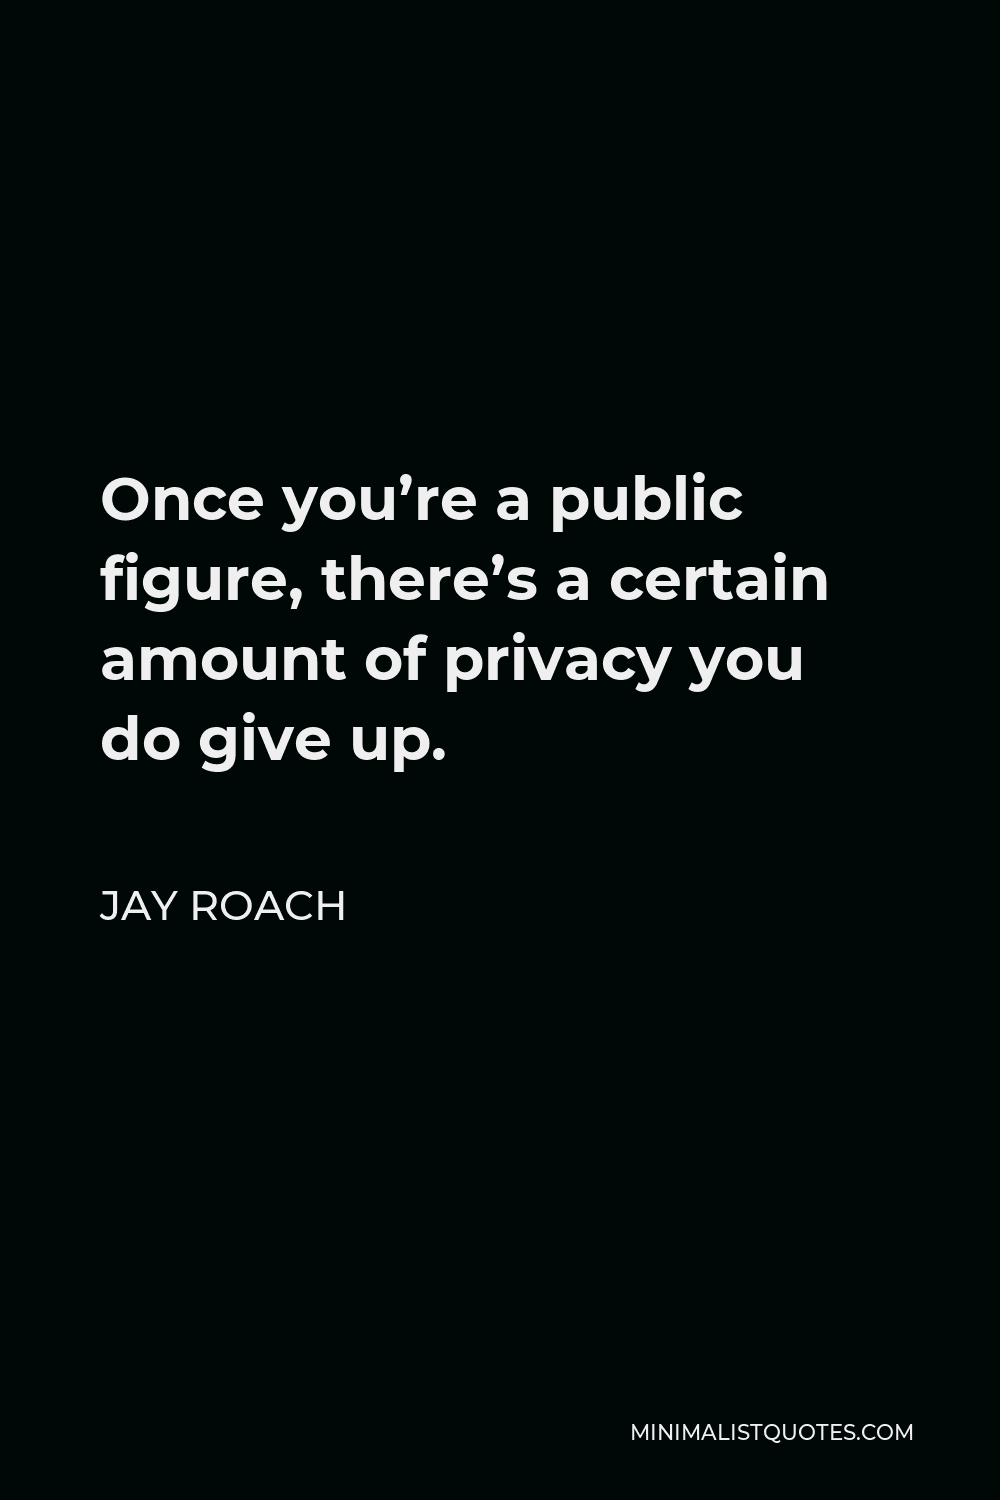 Jay Roach Quote - Once you’re a public figure, there’s a certain amount of privacy you do give up.